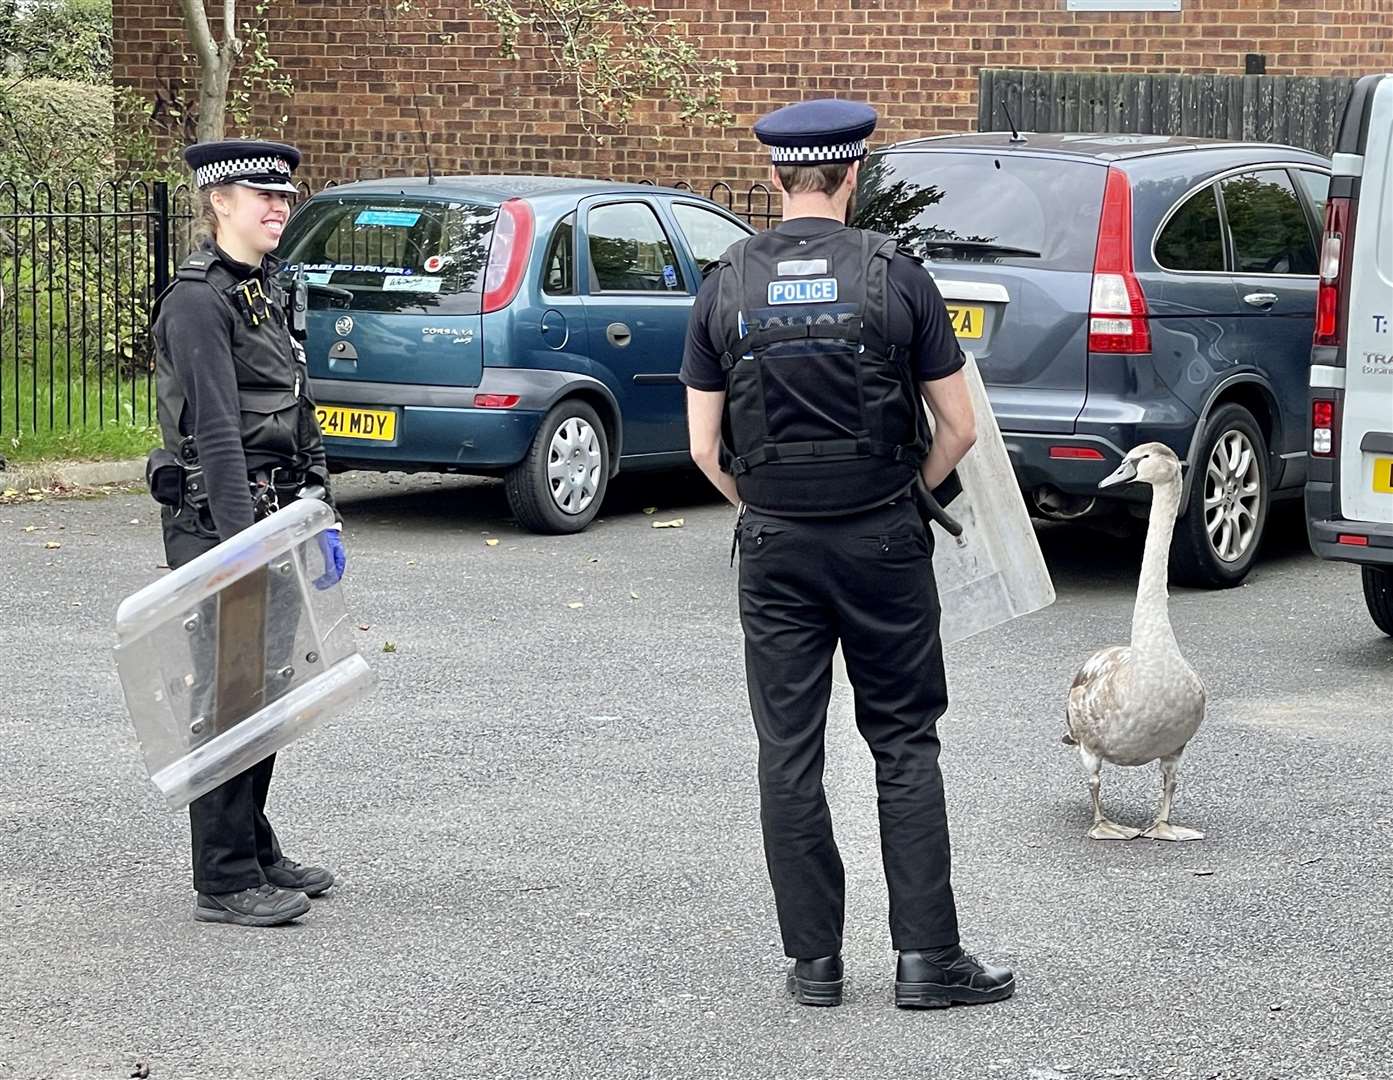 Officers try and keep the swan at bay. (Credit: Chris Parish)